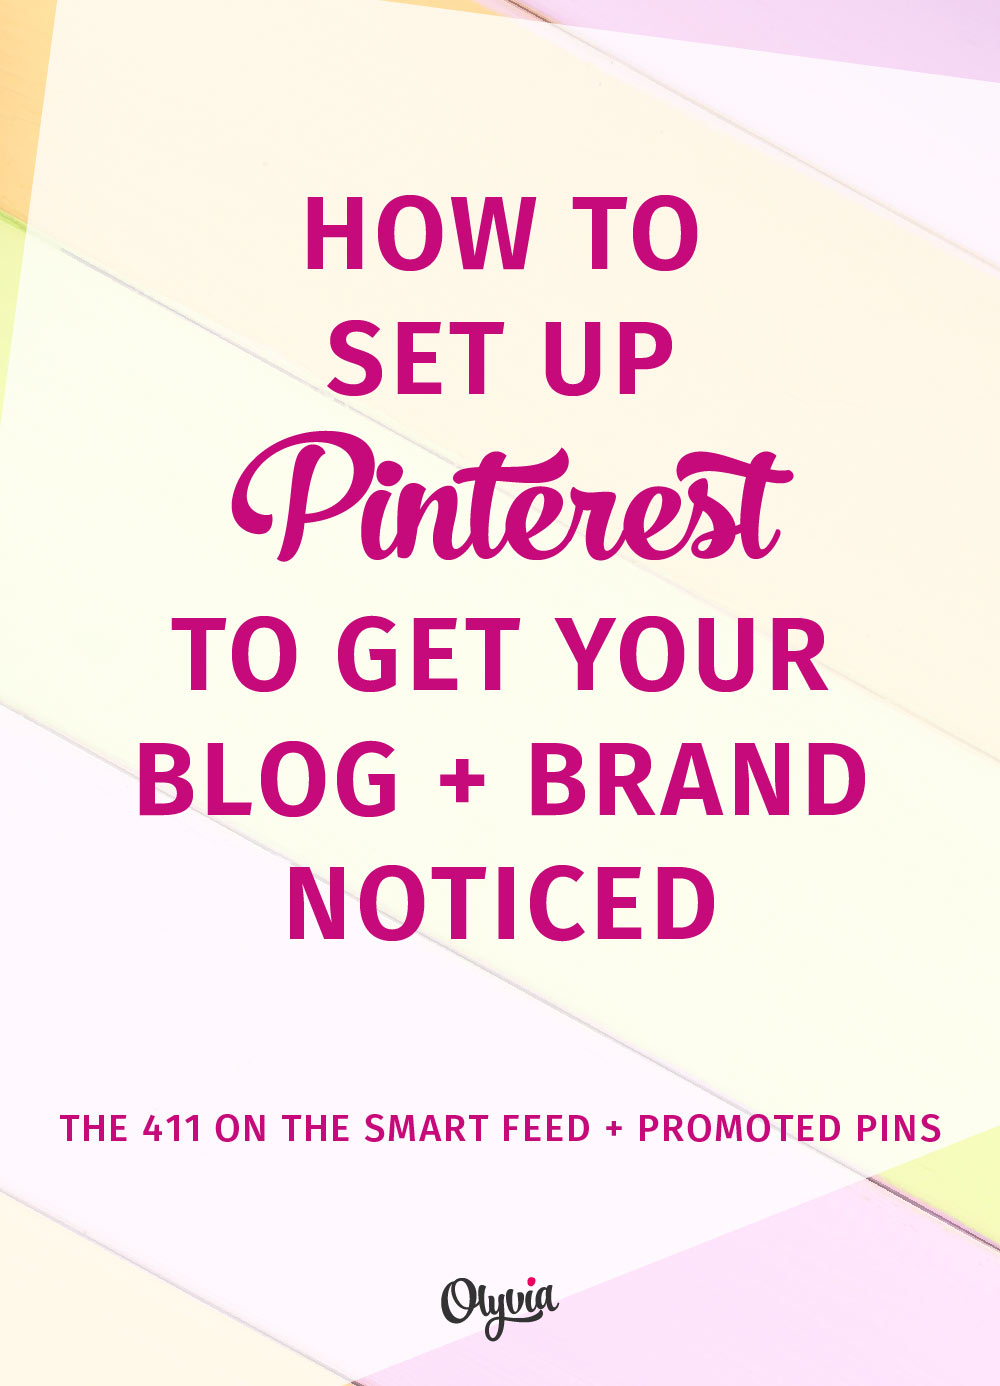 How to get noticed on Pinterest: the 411 on the smart feed + promoted pins, and what to put in place to help your blog + business.